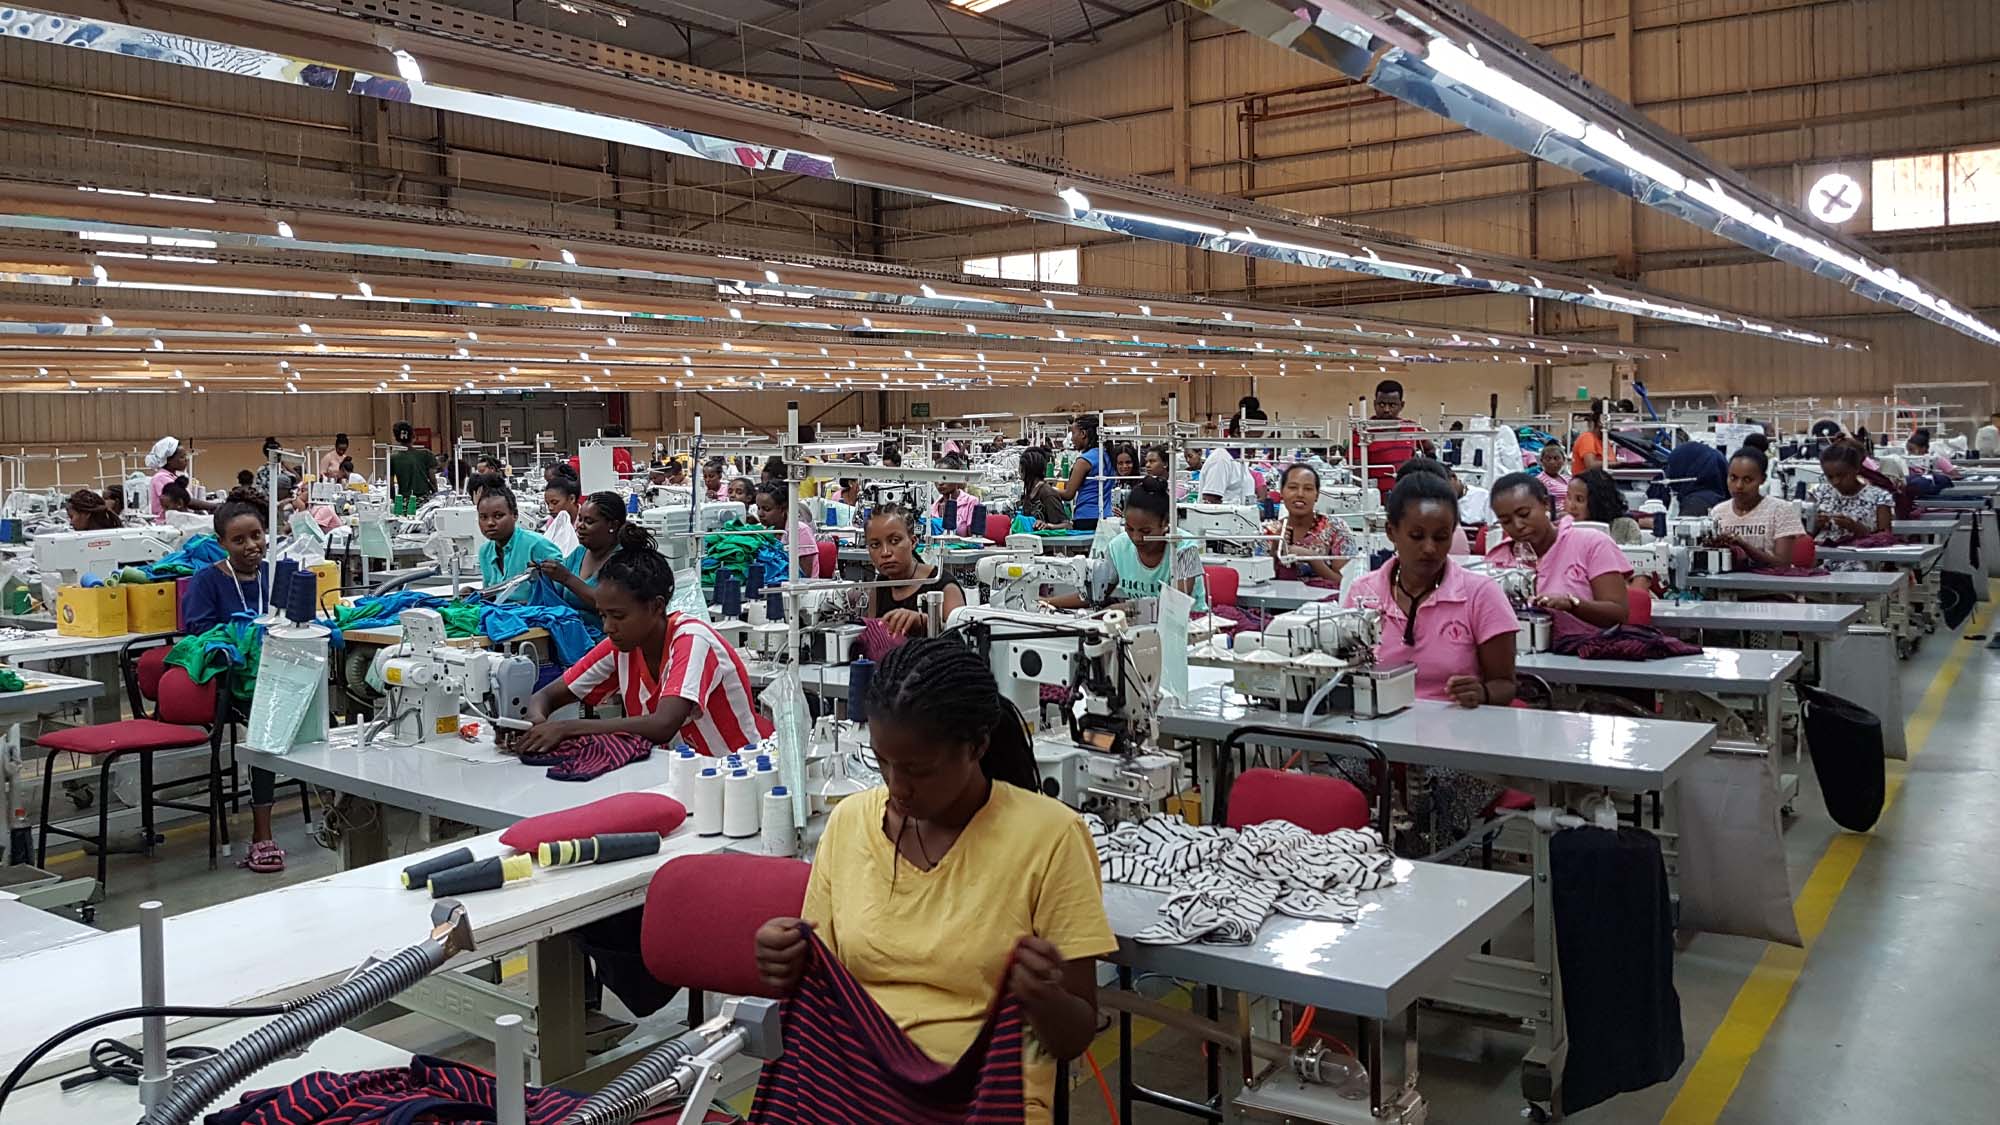 Textiles factory in Africa. Credit Shutterstock